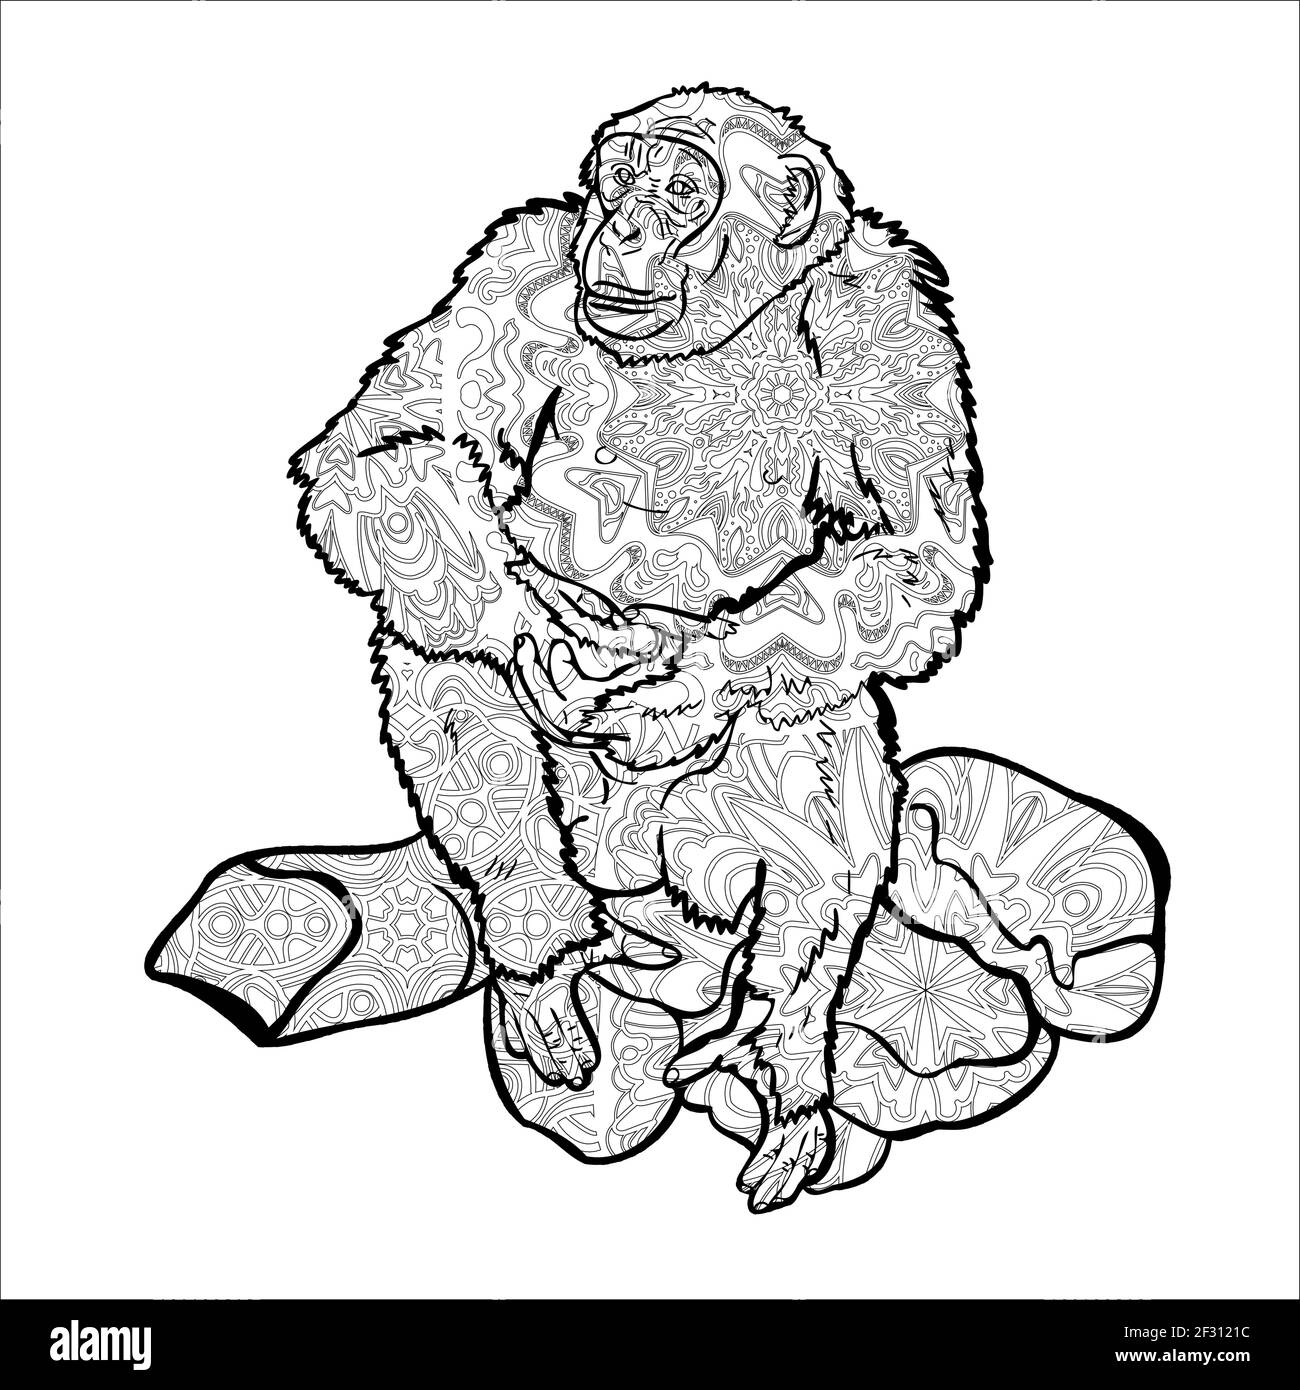 Chimpanzee sitting on rock, drawing with pattern for coloring, vector illustration. Stock Vector